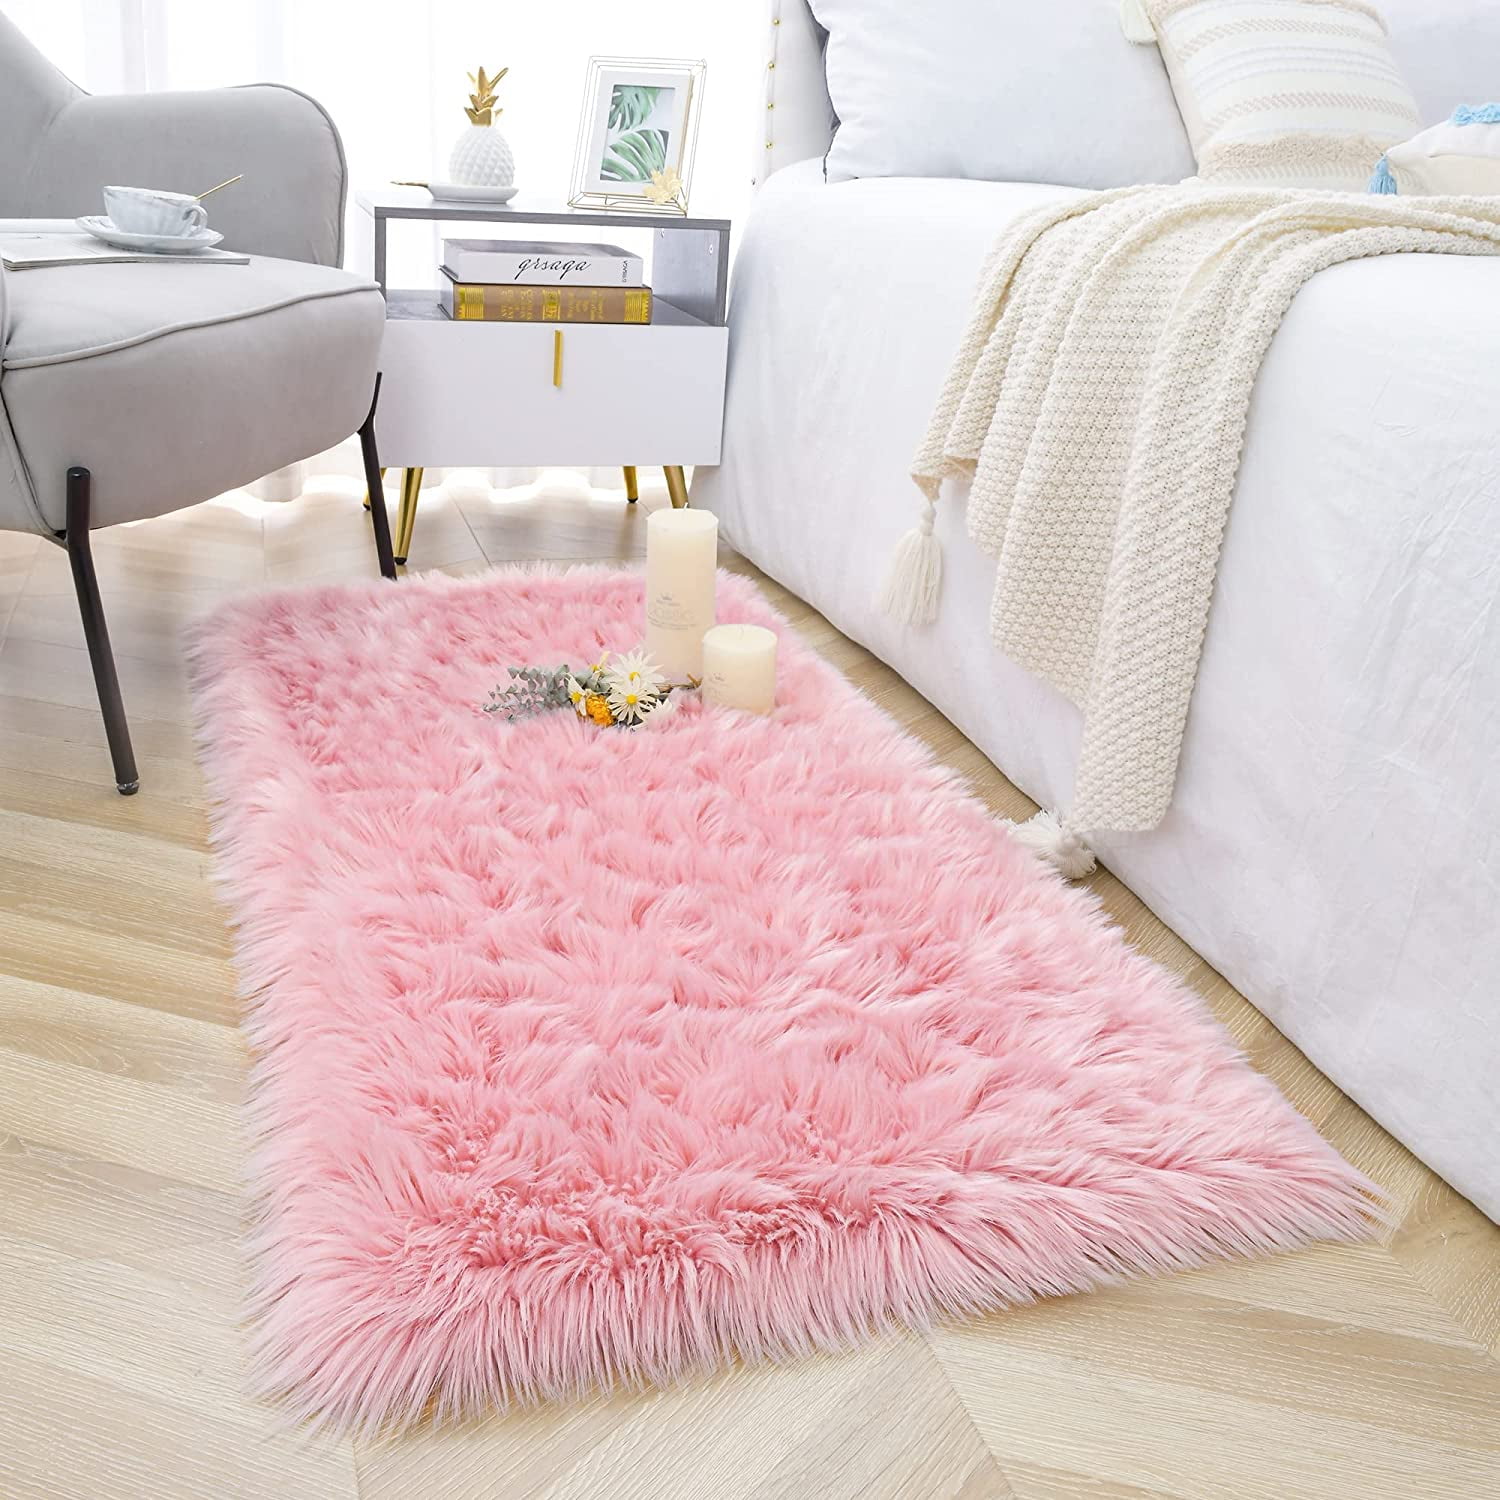 4ft x 5ft 7 120x170cm Pink Unicorn Rug for Kids Modern Style Rugs for Girls Bedrooms with Cream and Grey 